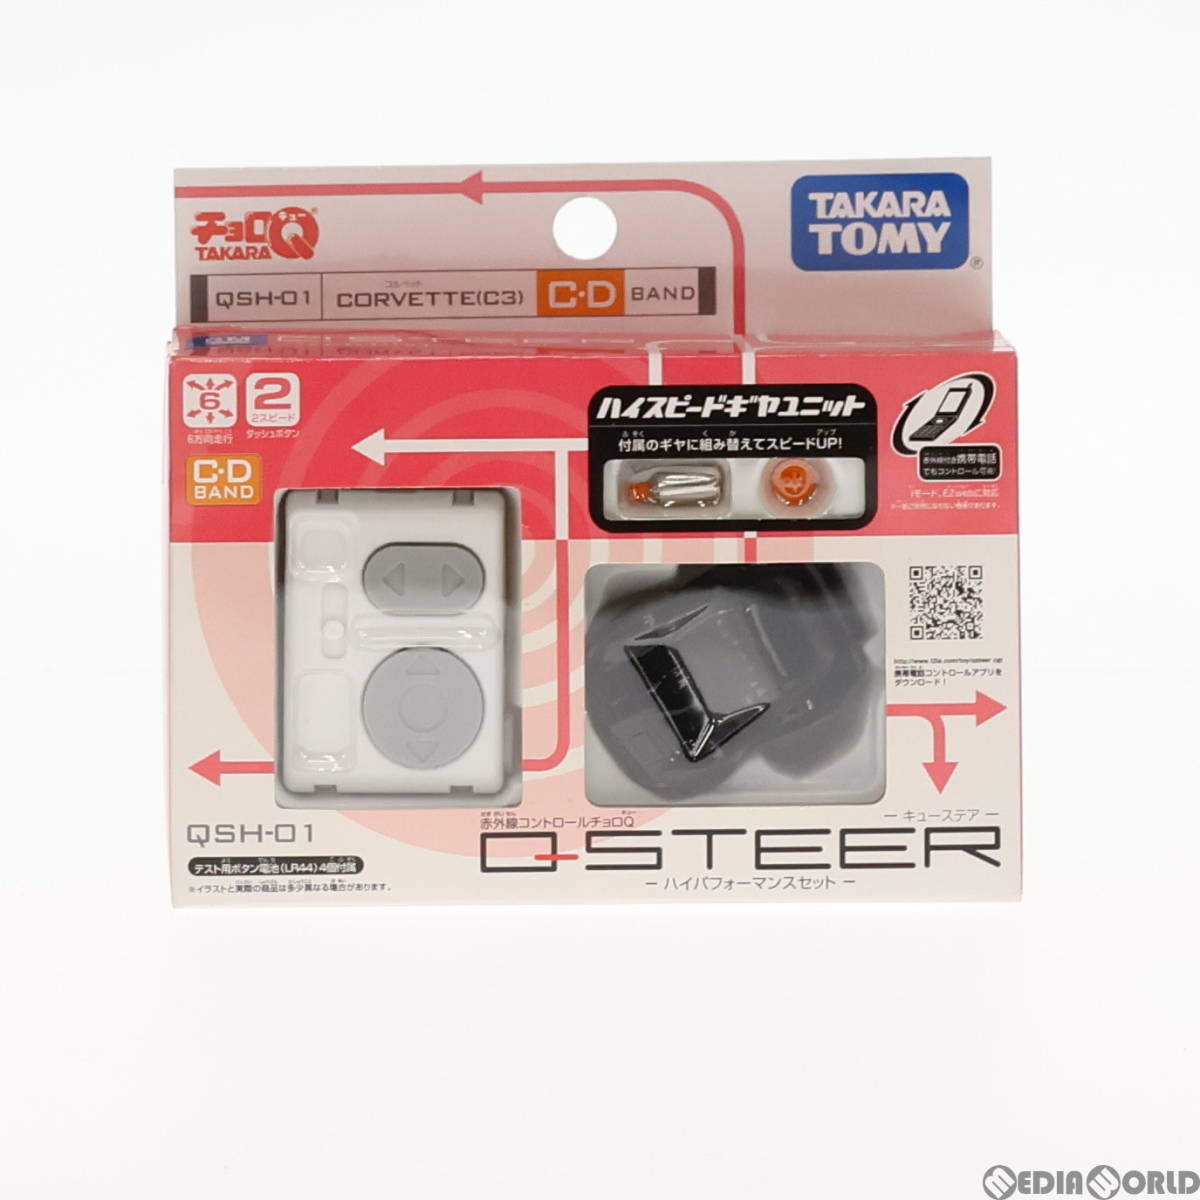 [ used ][RC] Choro Q Q-STEER - cue stereo a- high Performance set Corvette (C3) C*D band specification radio-controller (QSH-01) Takara Tommy (65